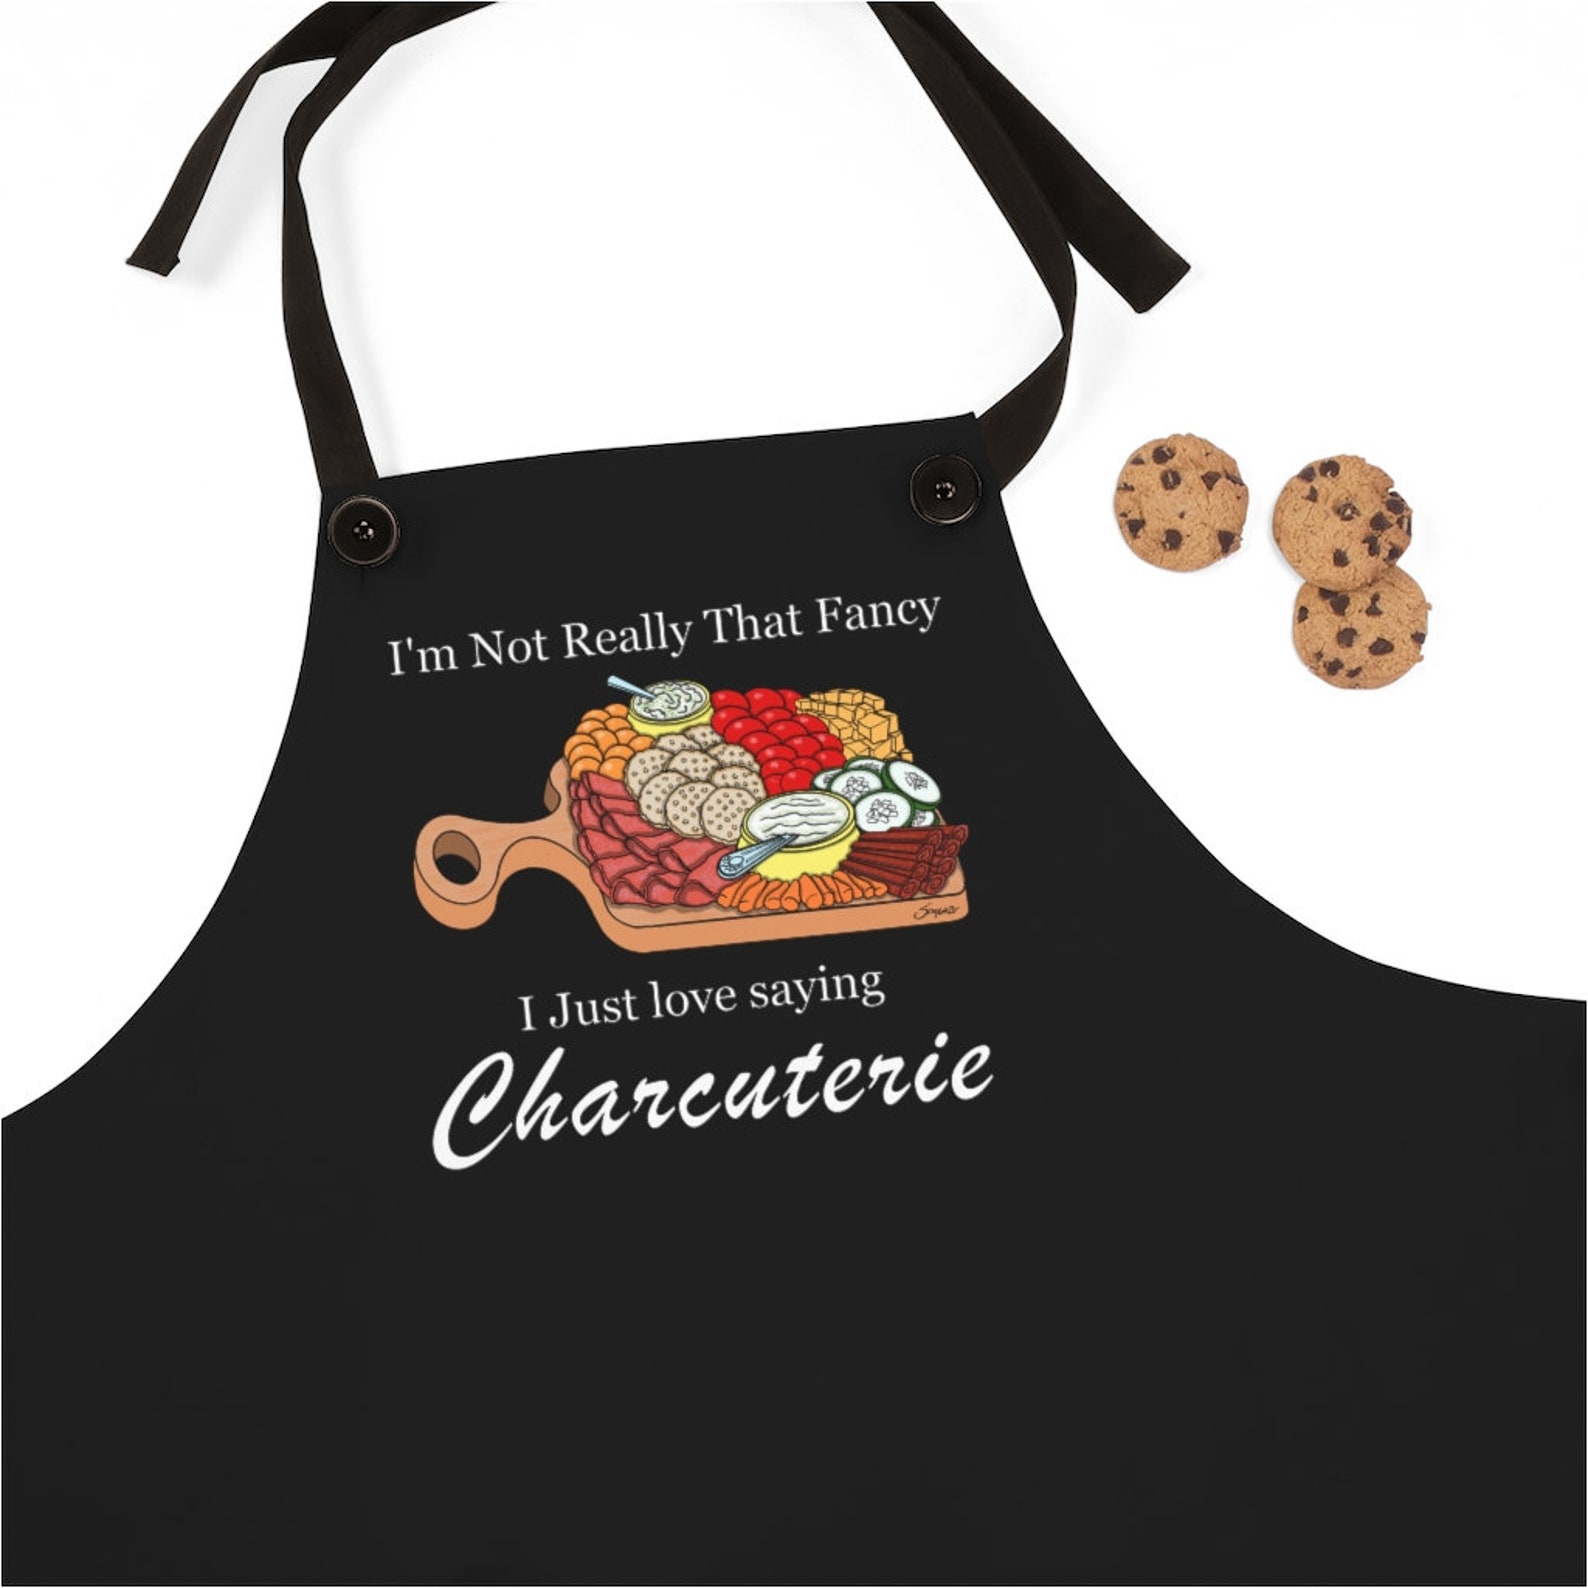 Funny Charcuterie Board “I’M NOT REALLY THAT FANCY” Apron